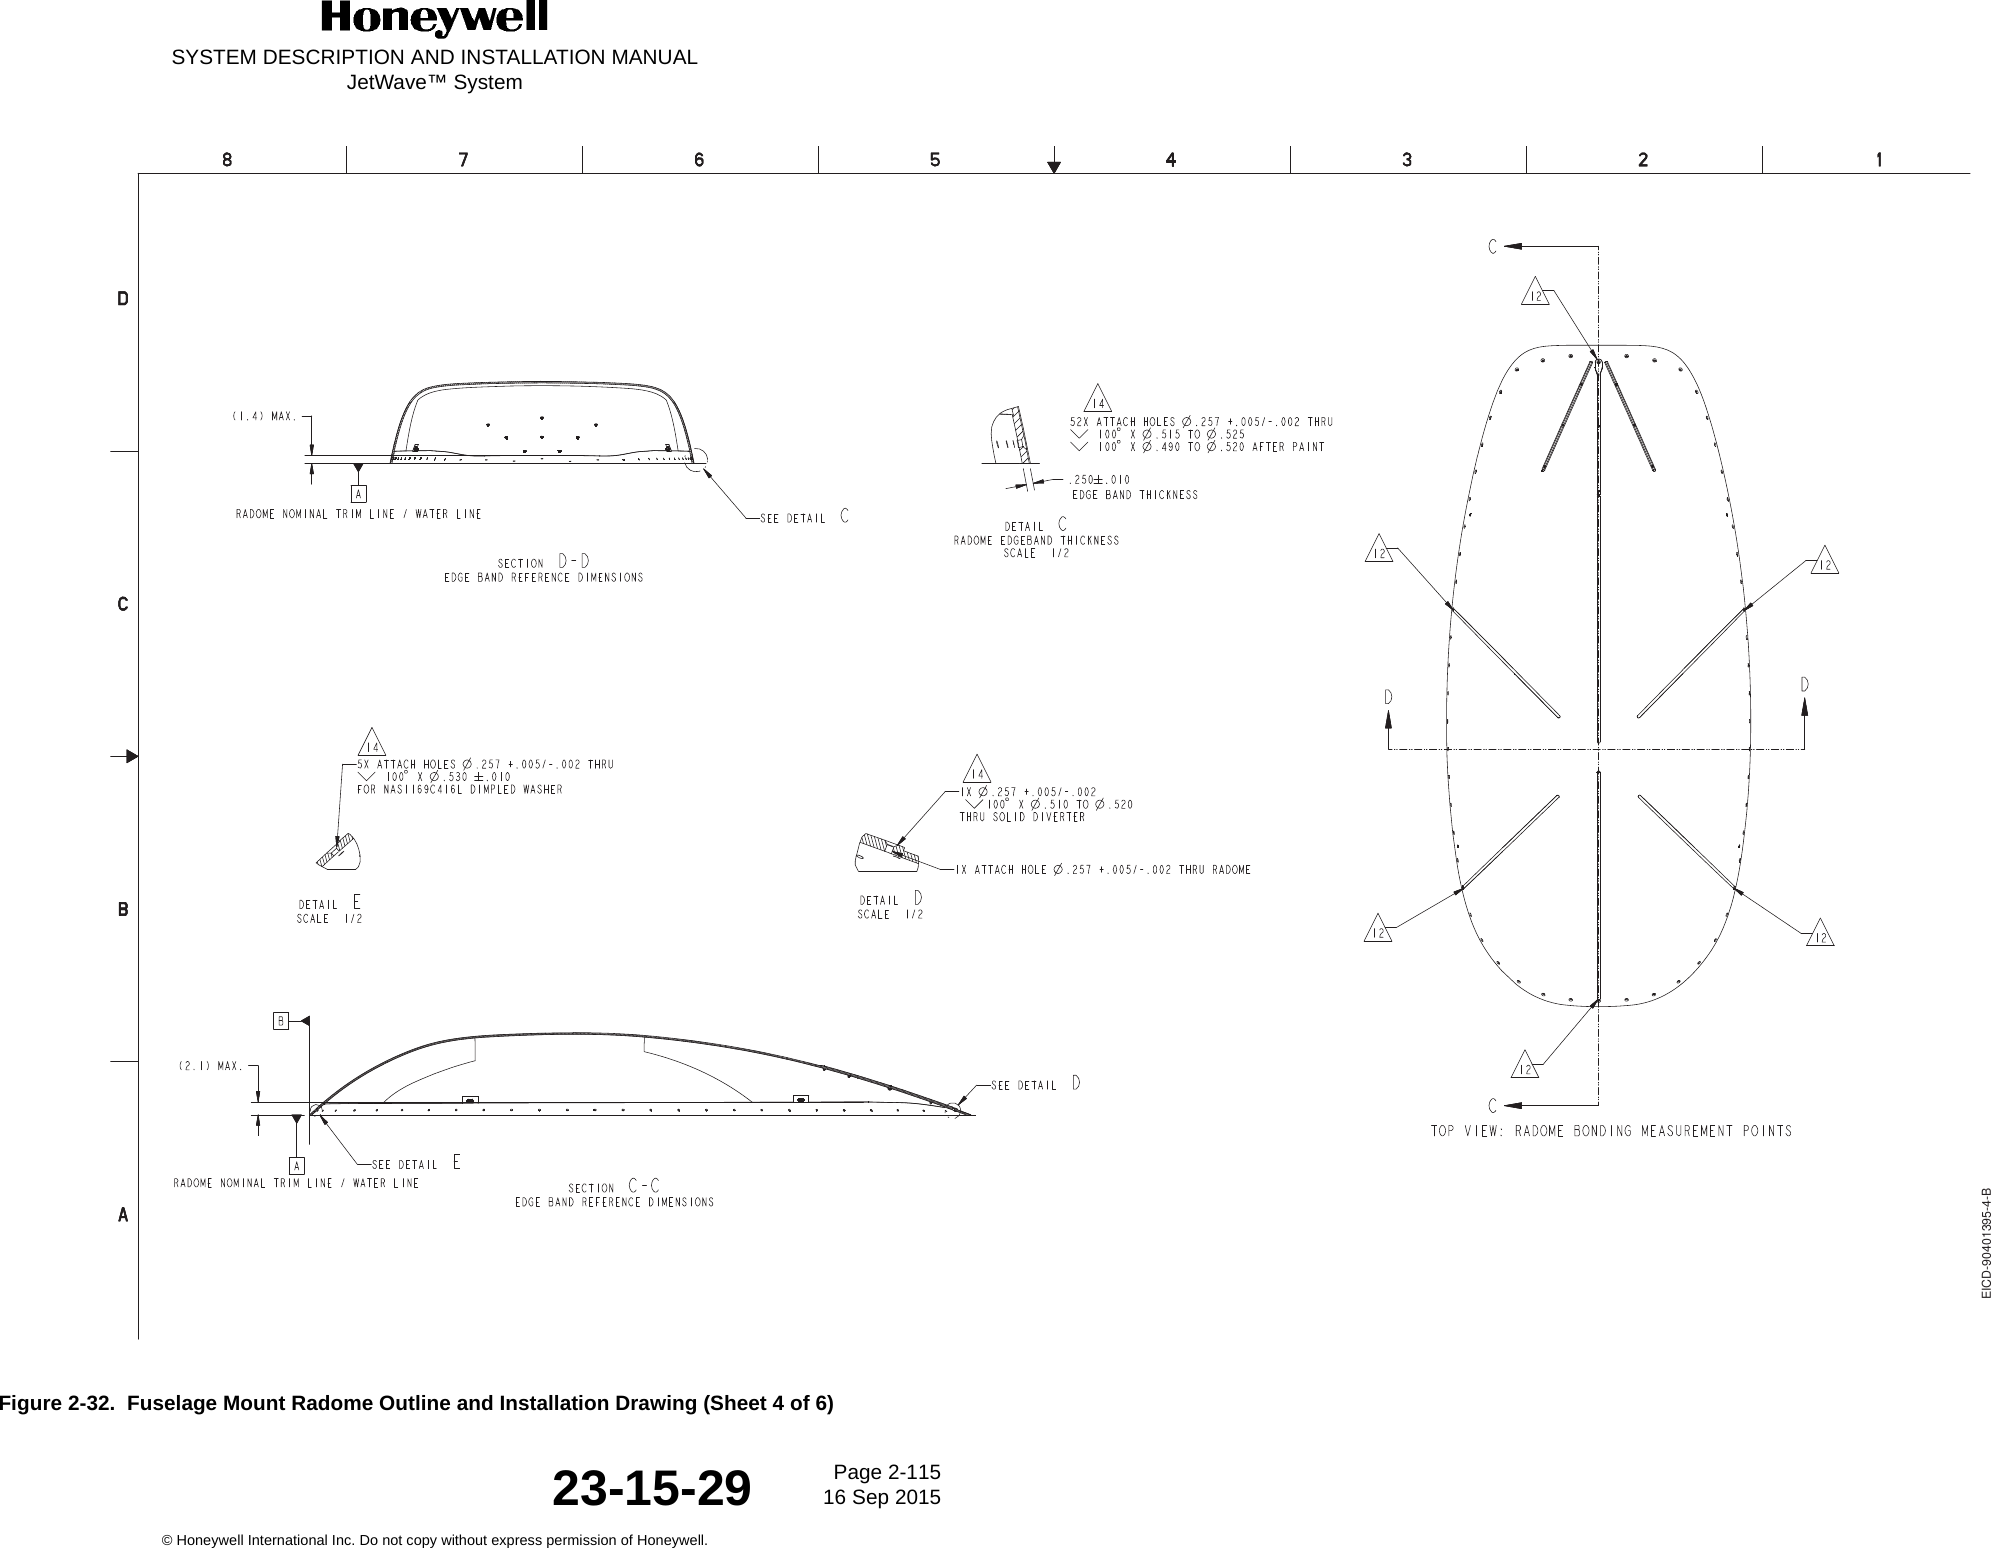 SYSTEM DESCRIPTION AND INSTALLATION MANUALJetWave™ SystemPage 2-115 16 Sep 2015© Honeywell International Inc. Do not copy without express permission of Honeywell.23-15-29Figure 2-32.  Fuselage Mount Radome Outline and Installation Drawing (Sheet 4 of 6) EICD-90401395-4-B